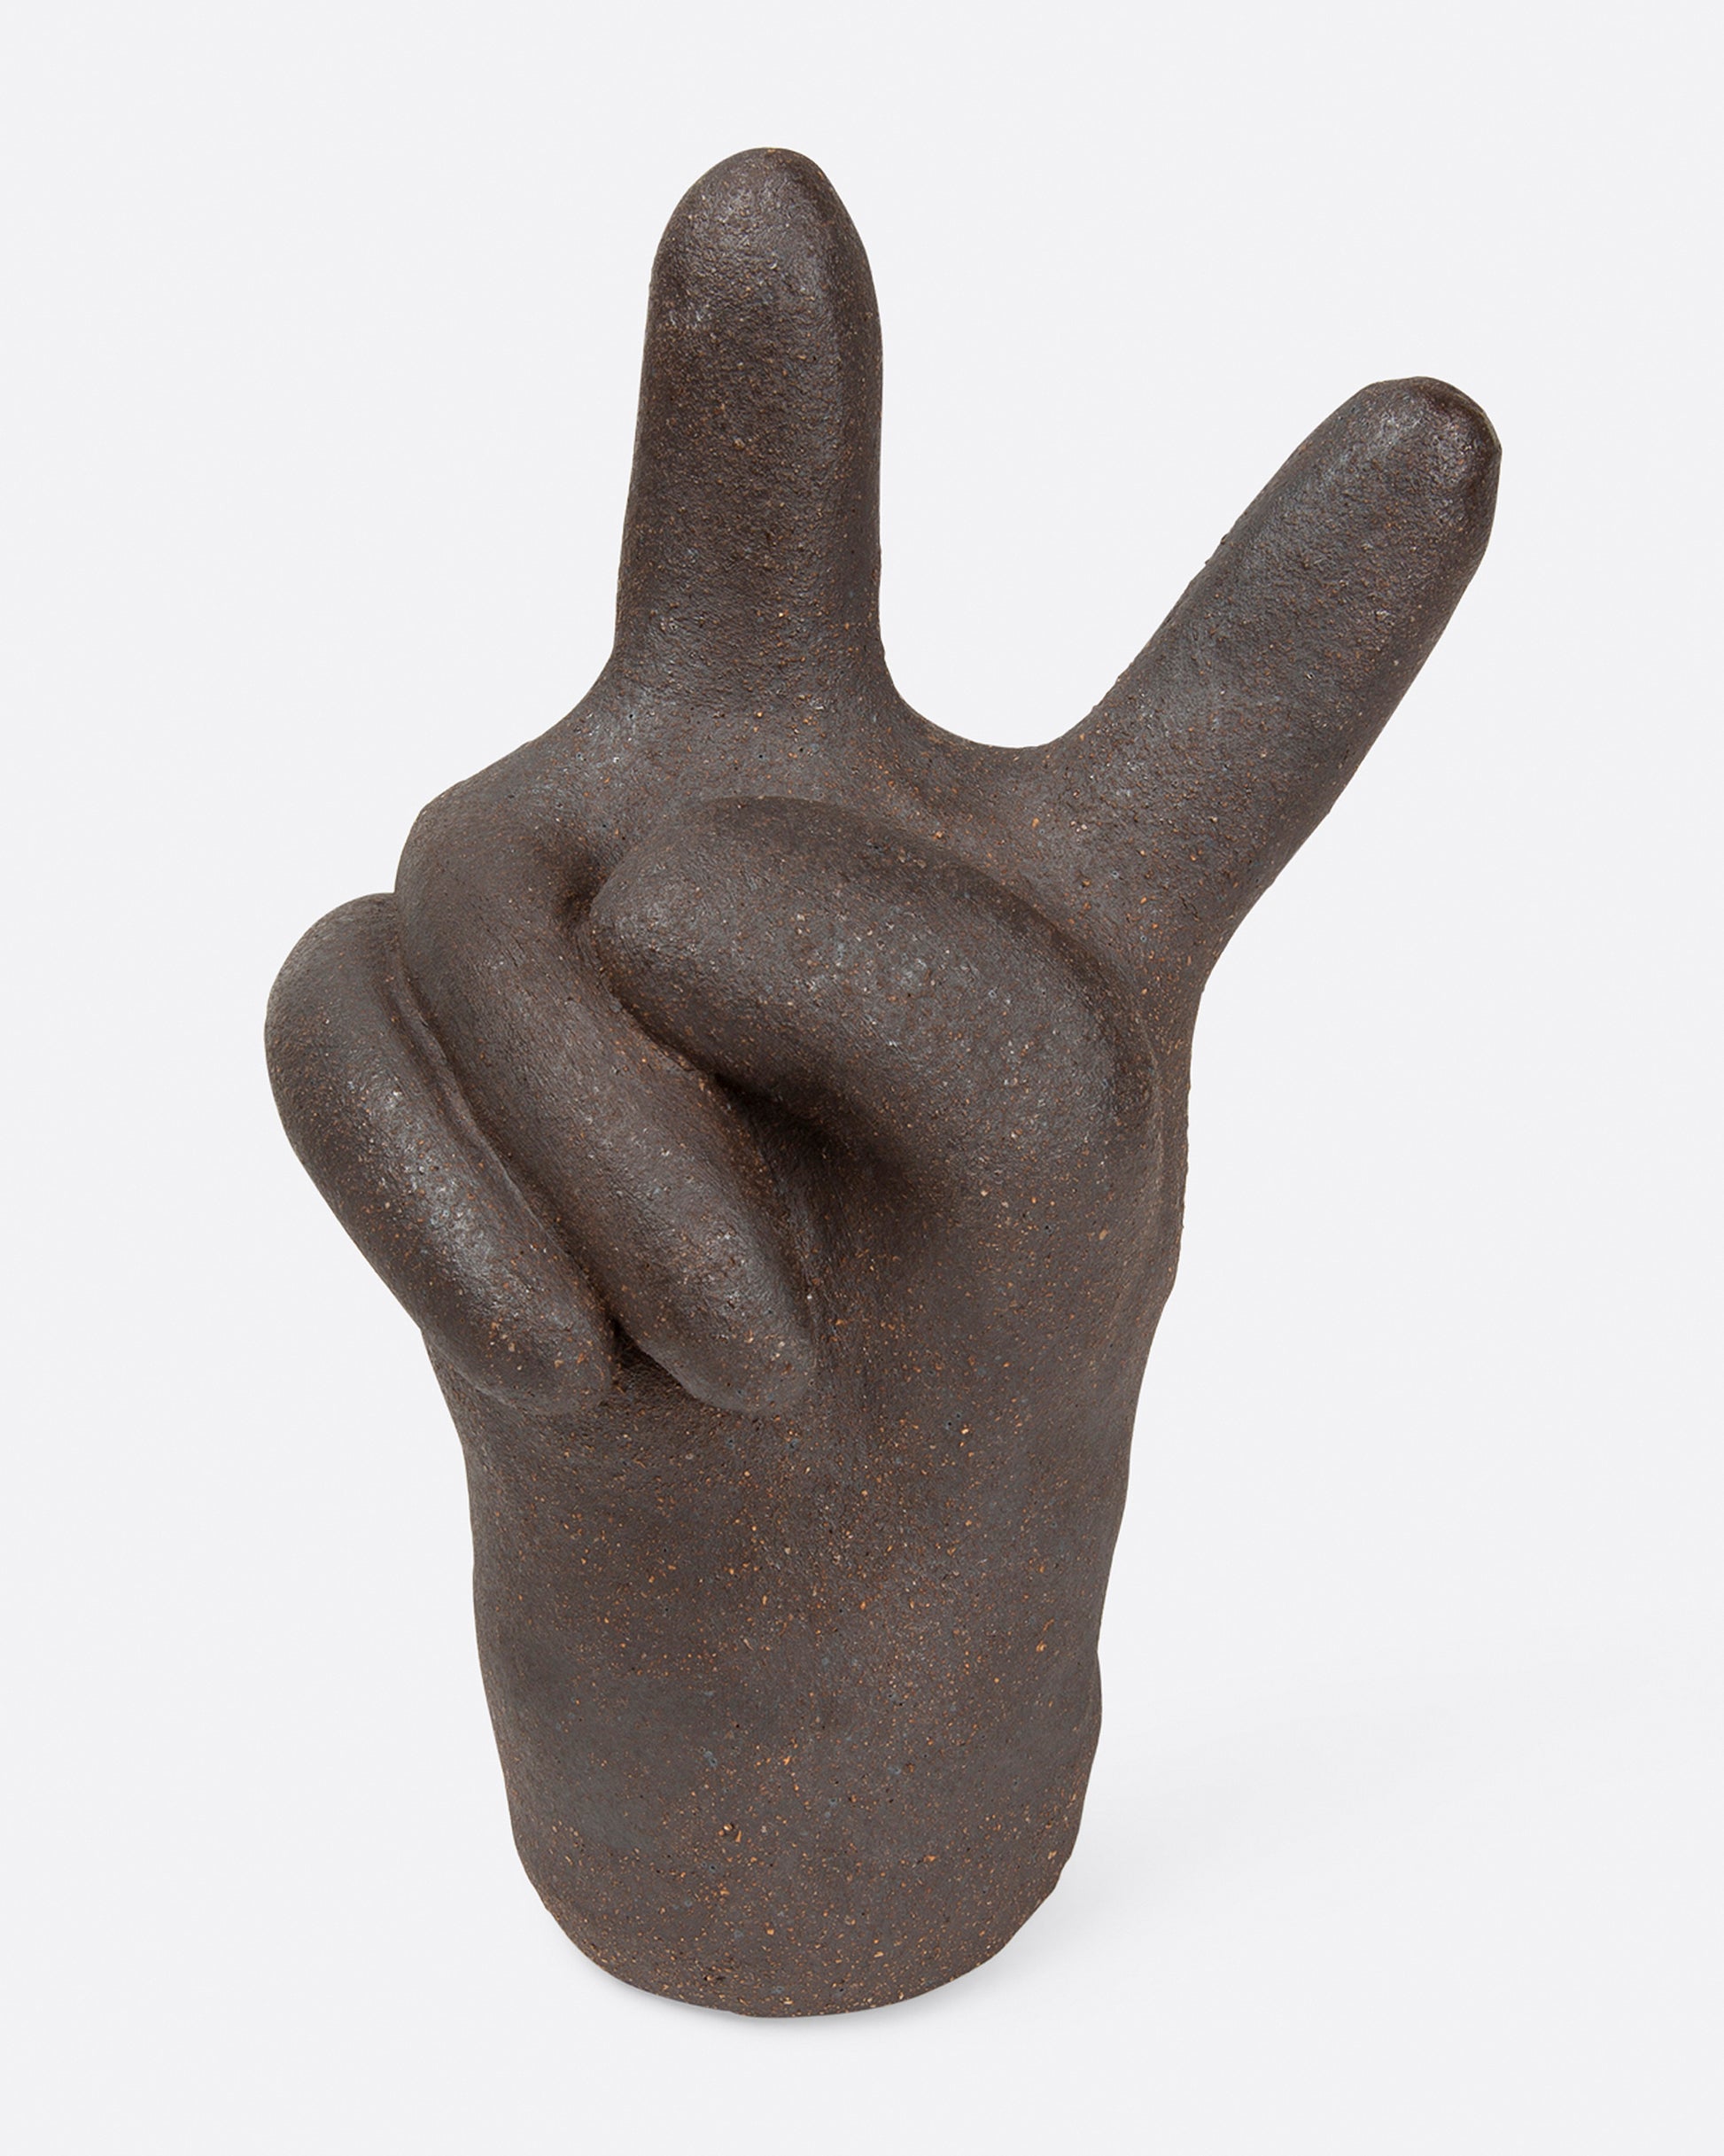 A large, dark brown peace hand sculpture, shown from the front.